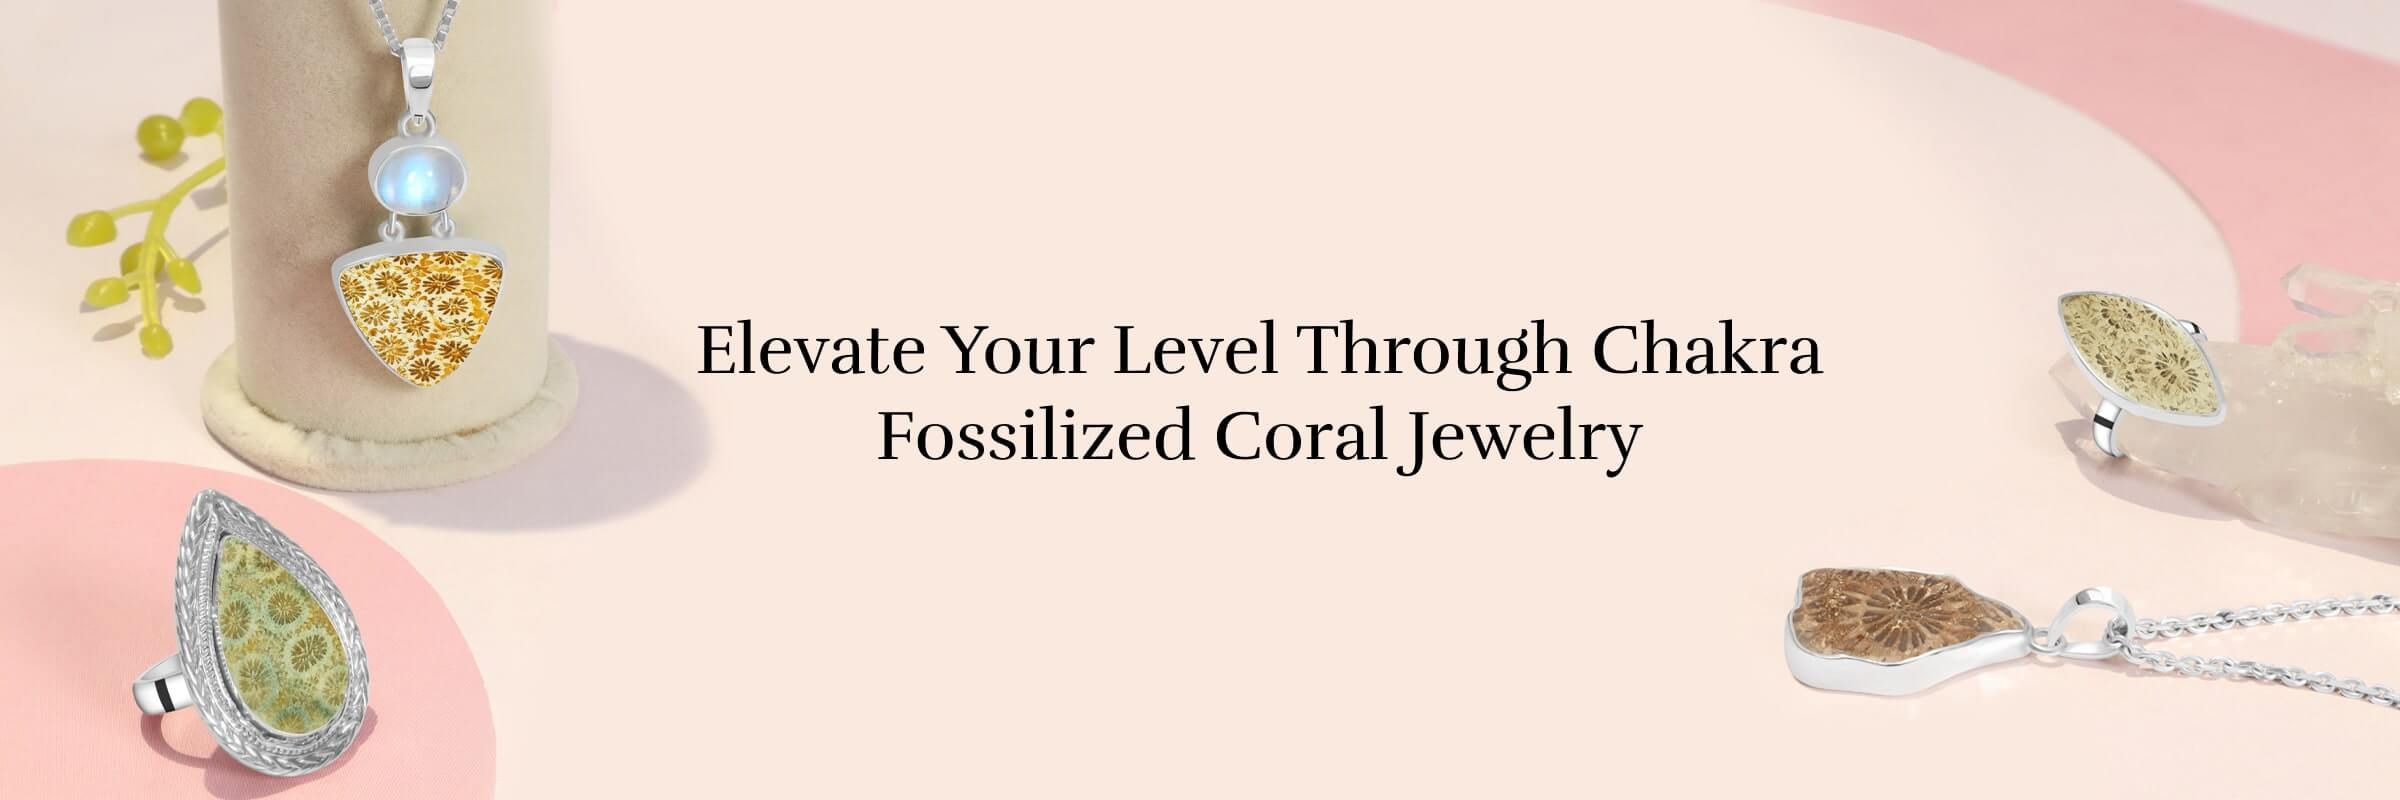 Activate Your Chakras with Unique Fossilized Coral Jewelry